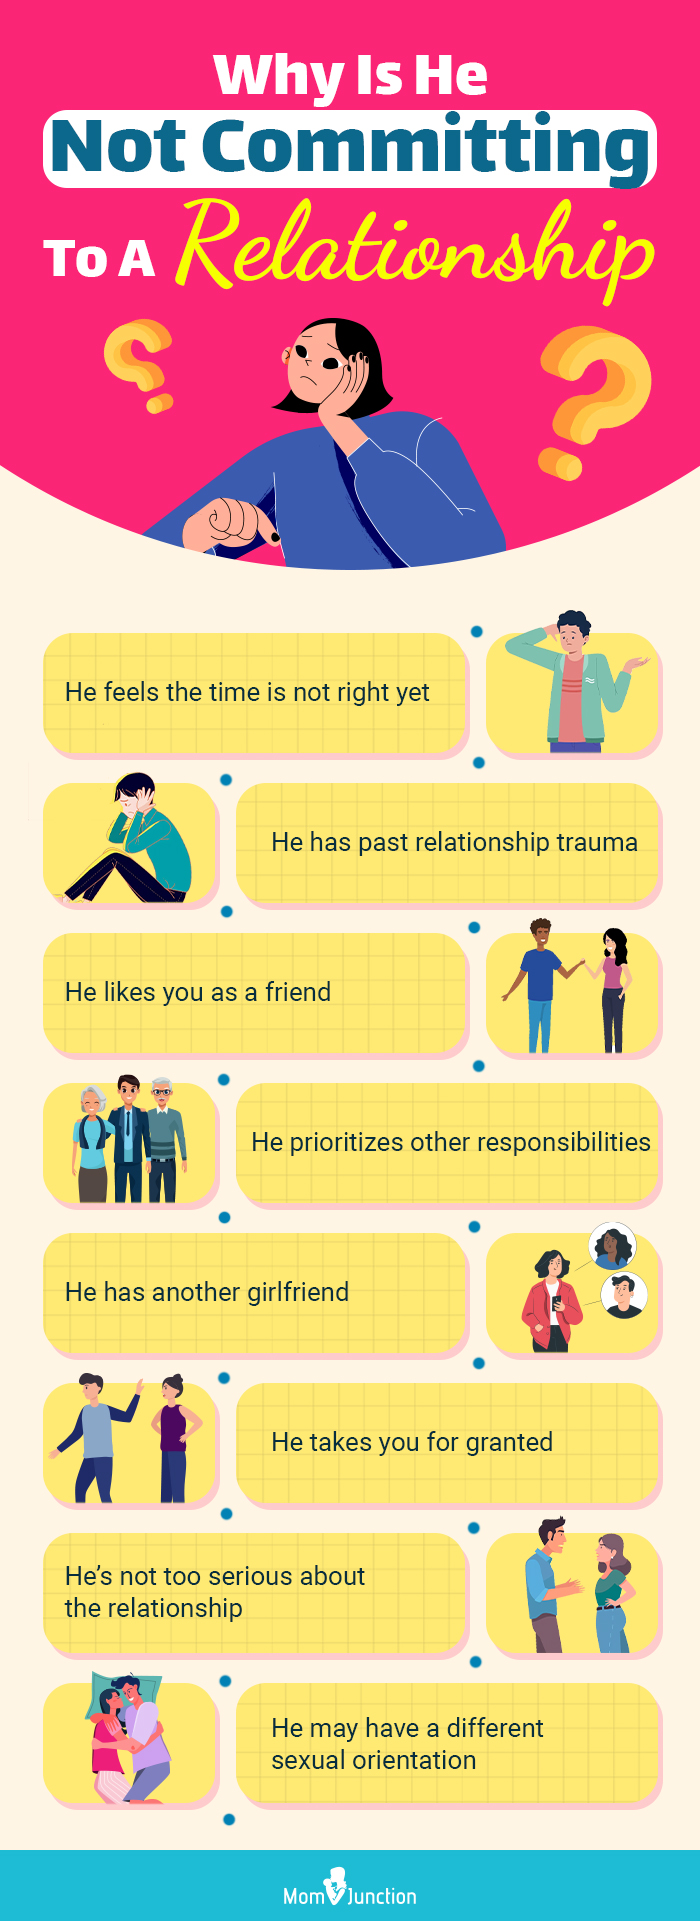 why is he not committing to a relationship(infographic)